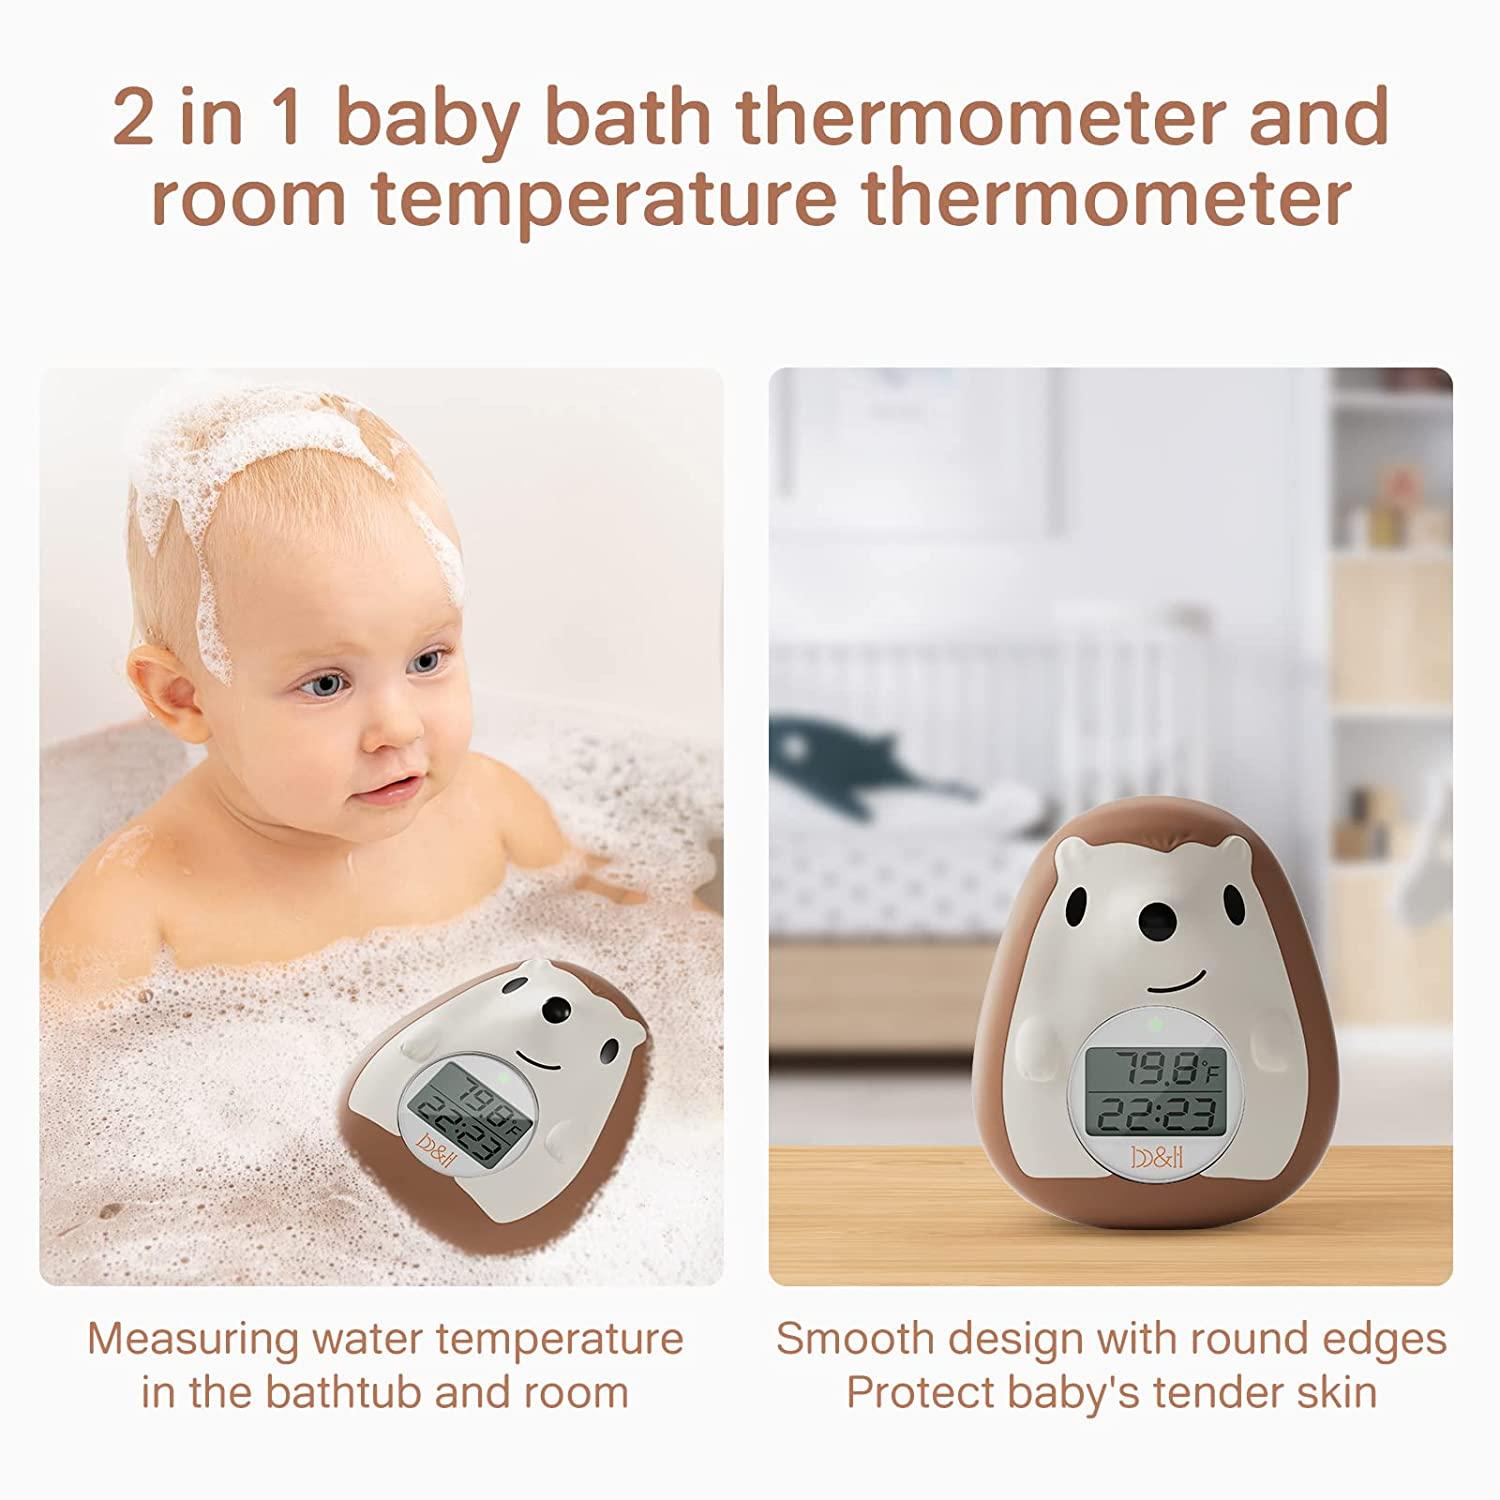 b&h Baby Thermometer, The Infant Baby Bath Floating Toy Safety Temperature  Water Thermometer (Classic Duck)